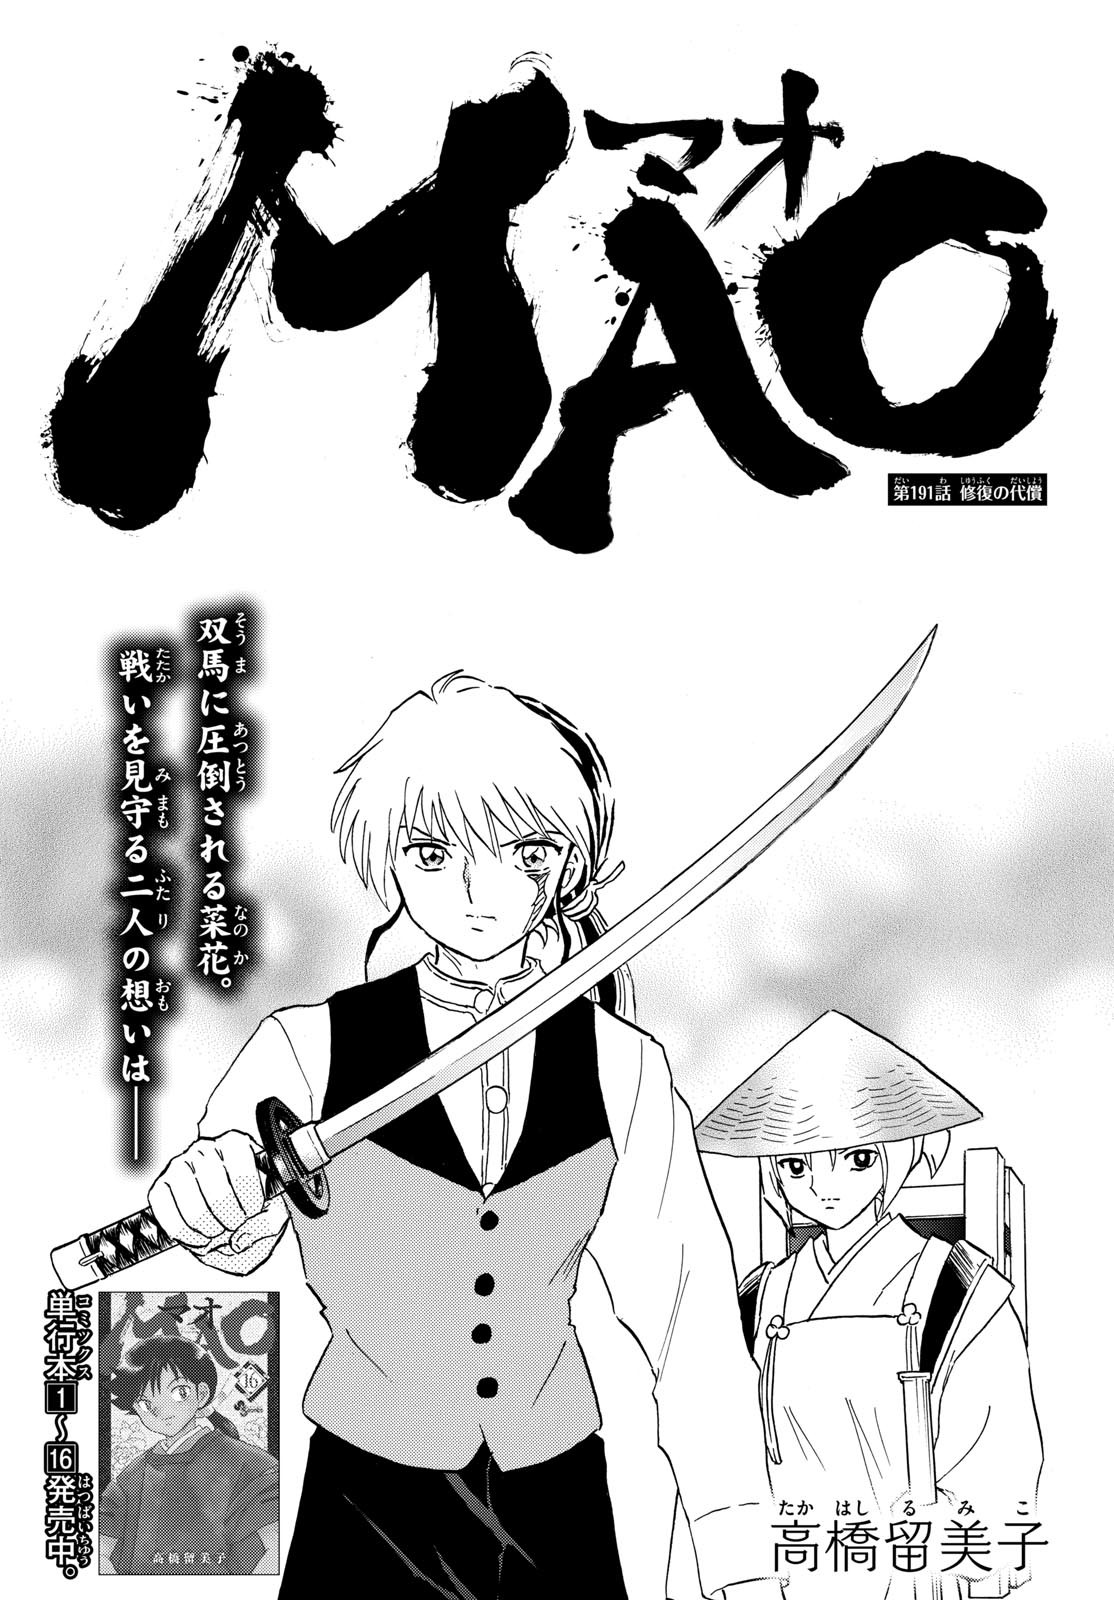 MAO - Chapter 191 - Page 1